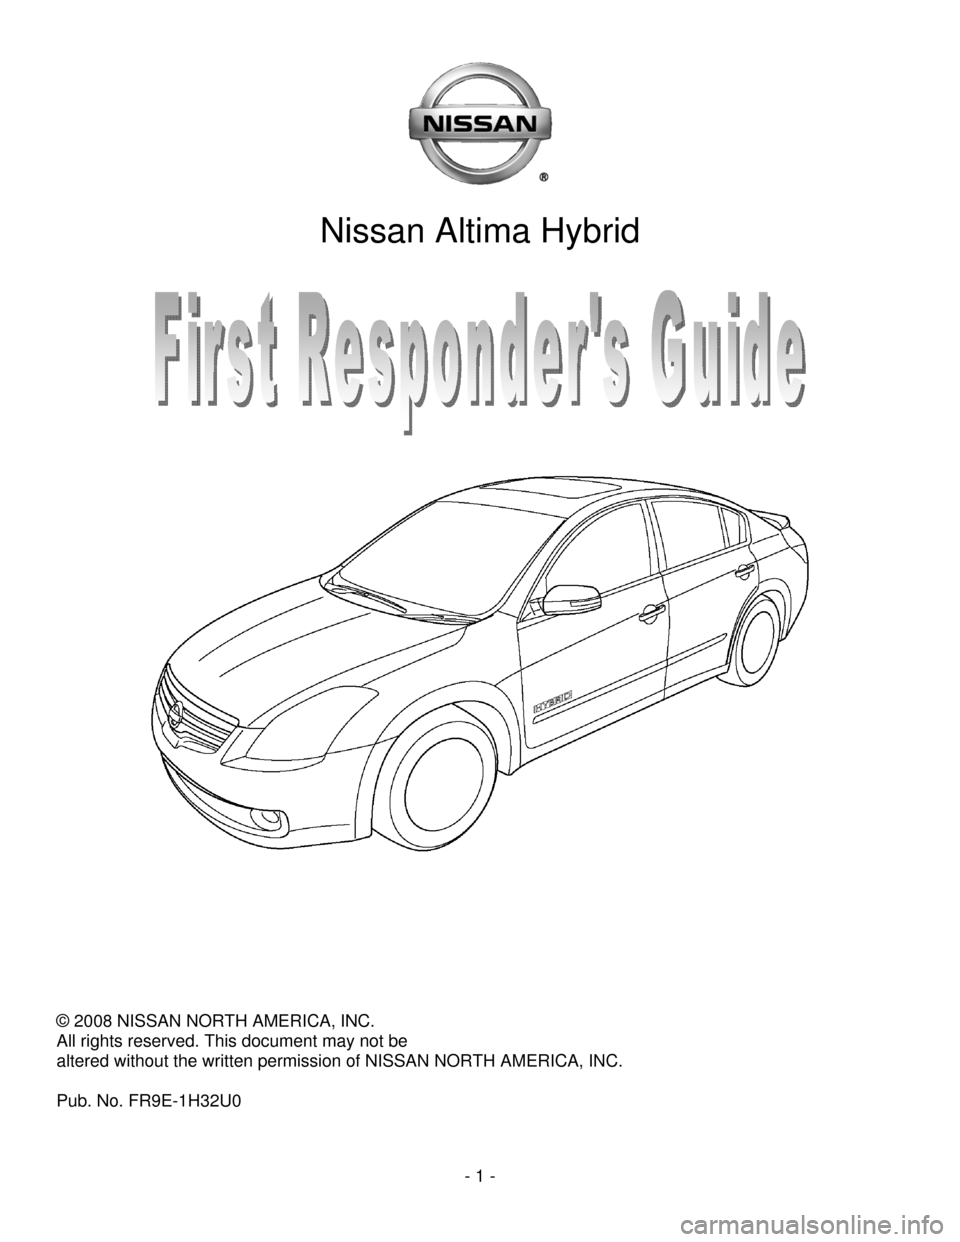 NISSAN ALTIMA HYBRID 2009 L32A / 4.G First Responders Guide - 1 - 
 
 
Nissan Altima Hybrid 
 
 
 
 
 
 
 
 
 
© 2008 NISSAN NORTH AMERICA, INC. 
All rights reserved. This document may not be  
altered without the written permission of NISSAN NORTH AMERICA, I